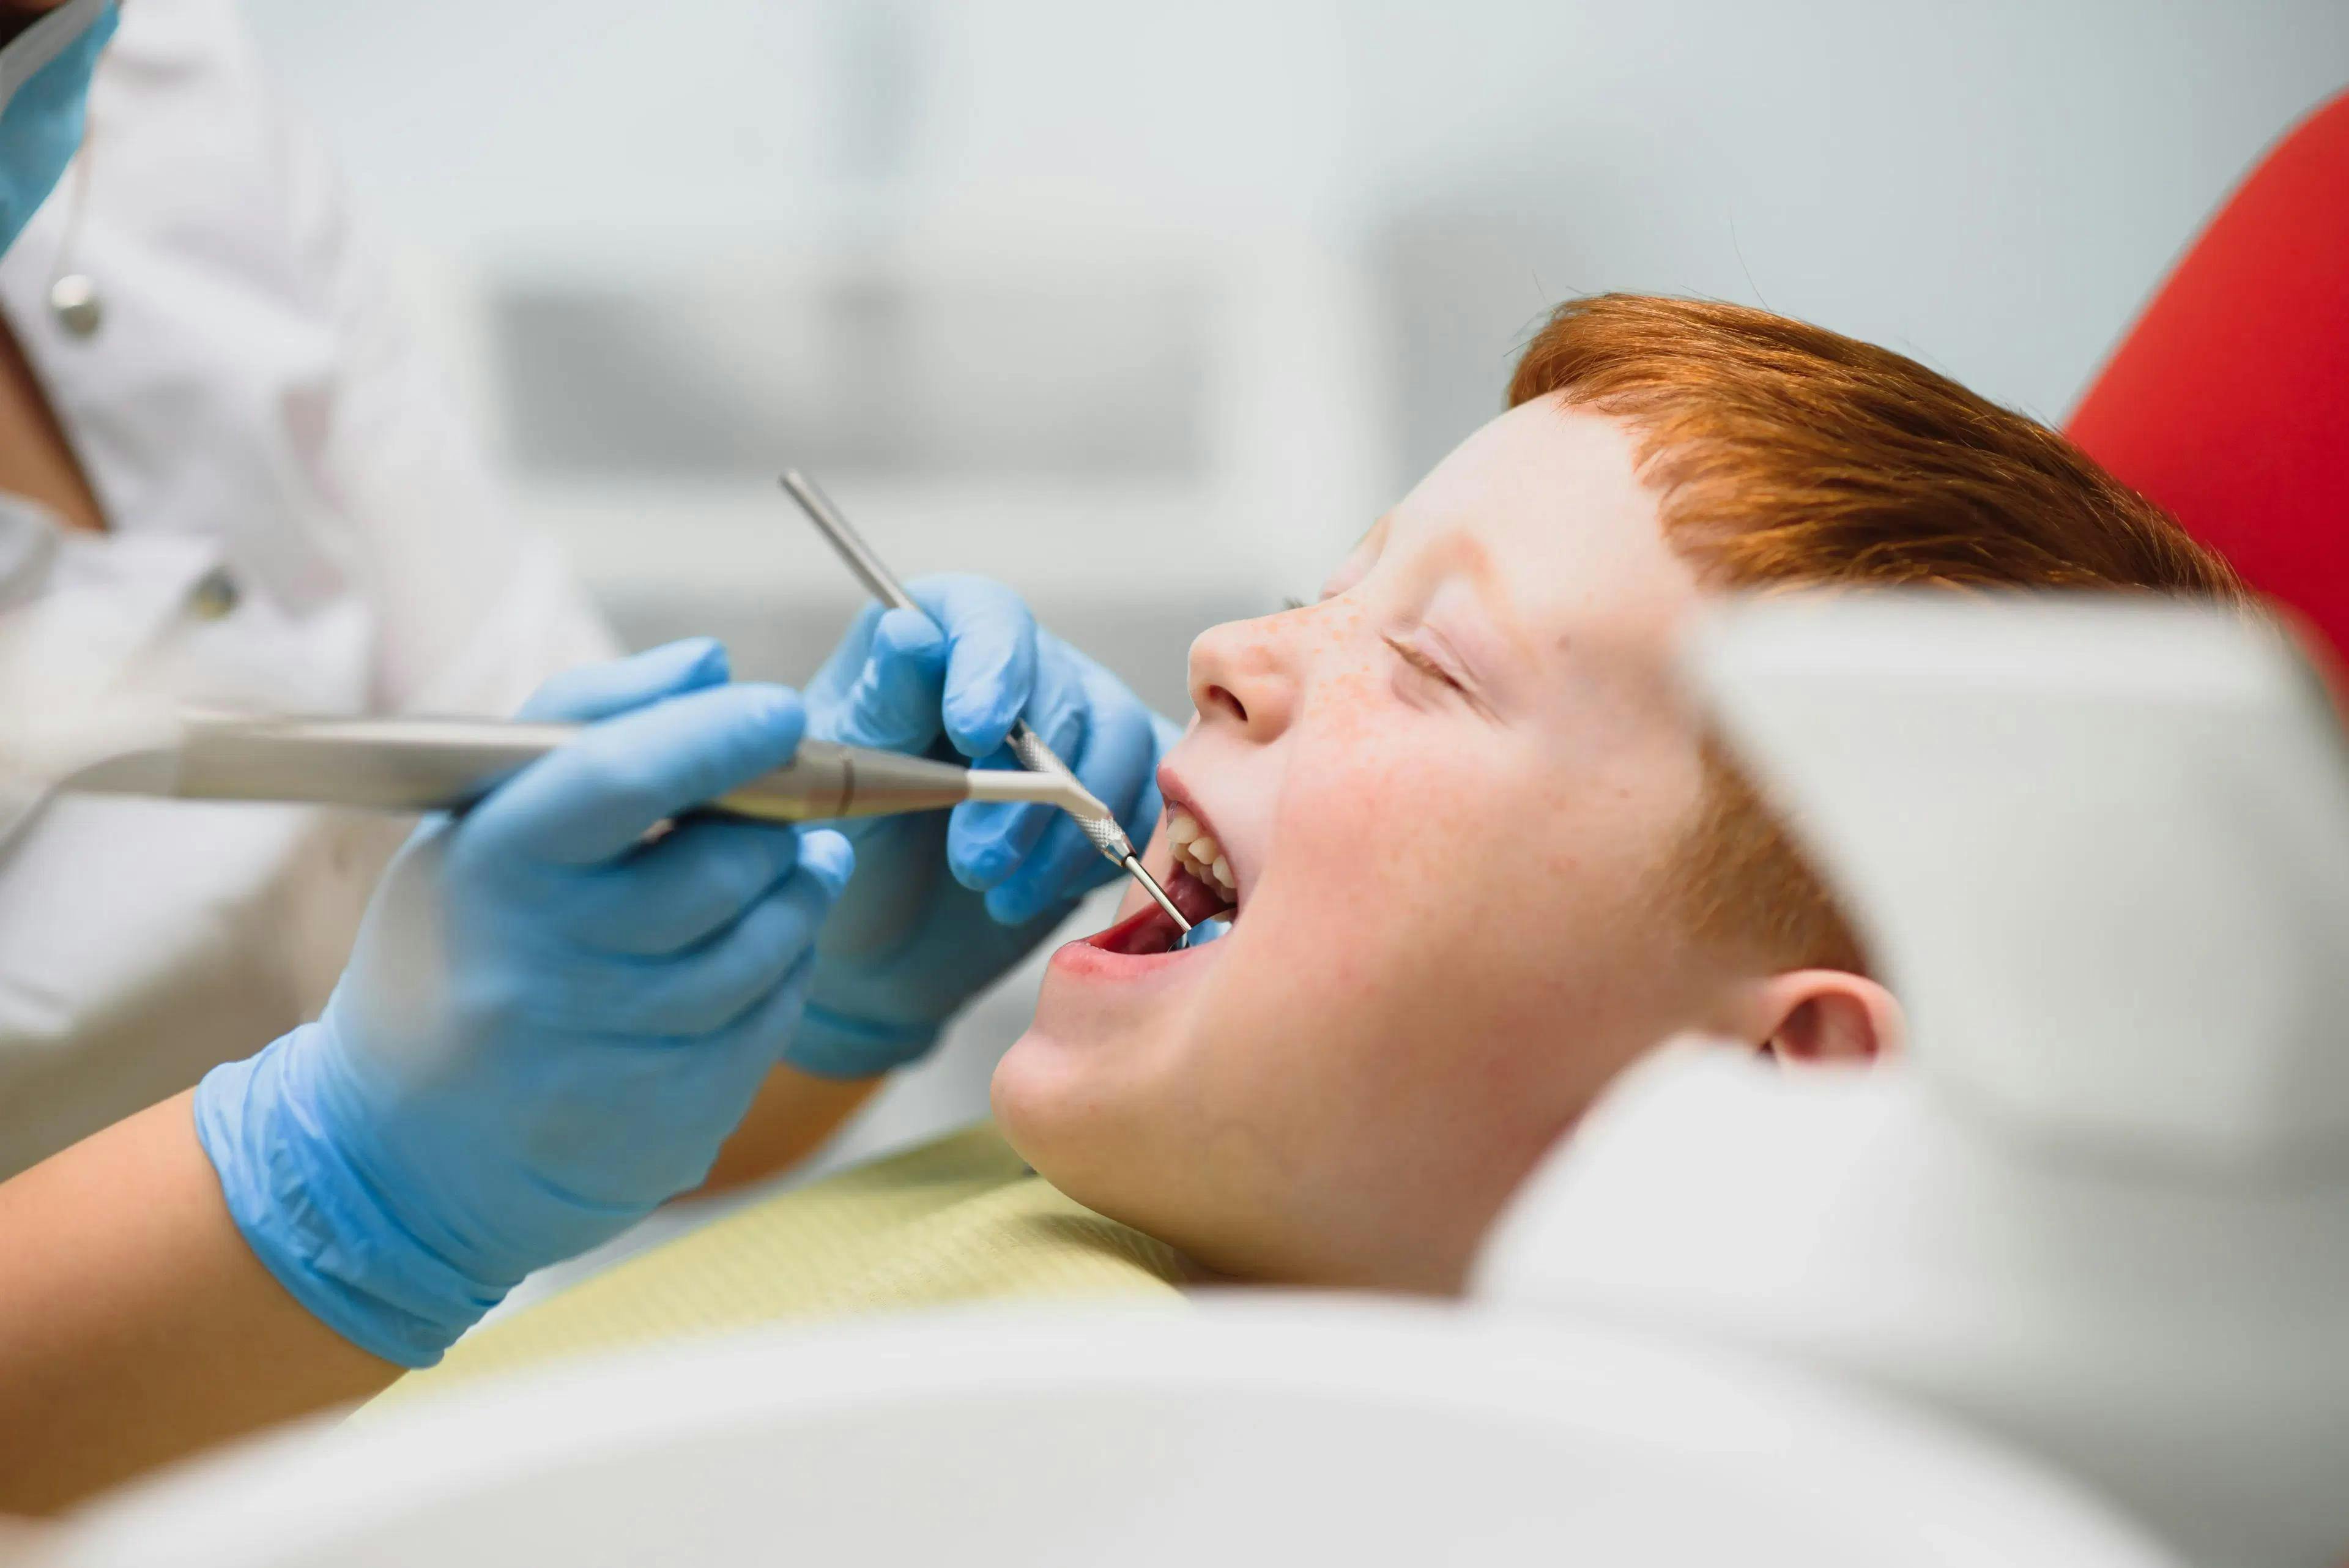 Orthodontic treatment for children at Ortocreative